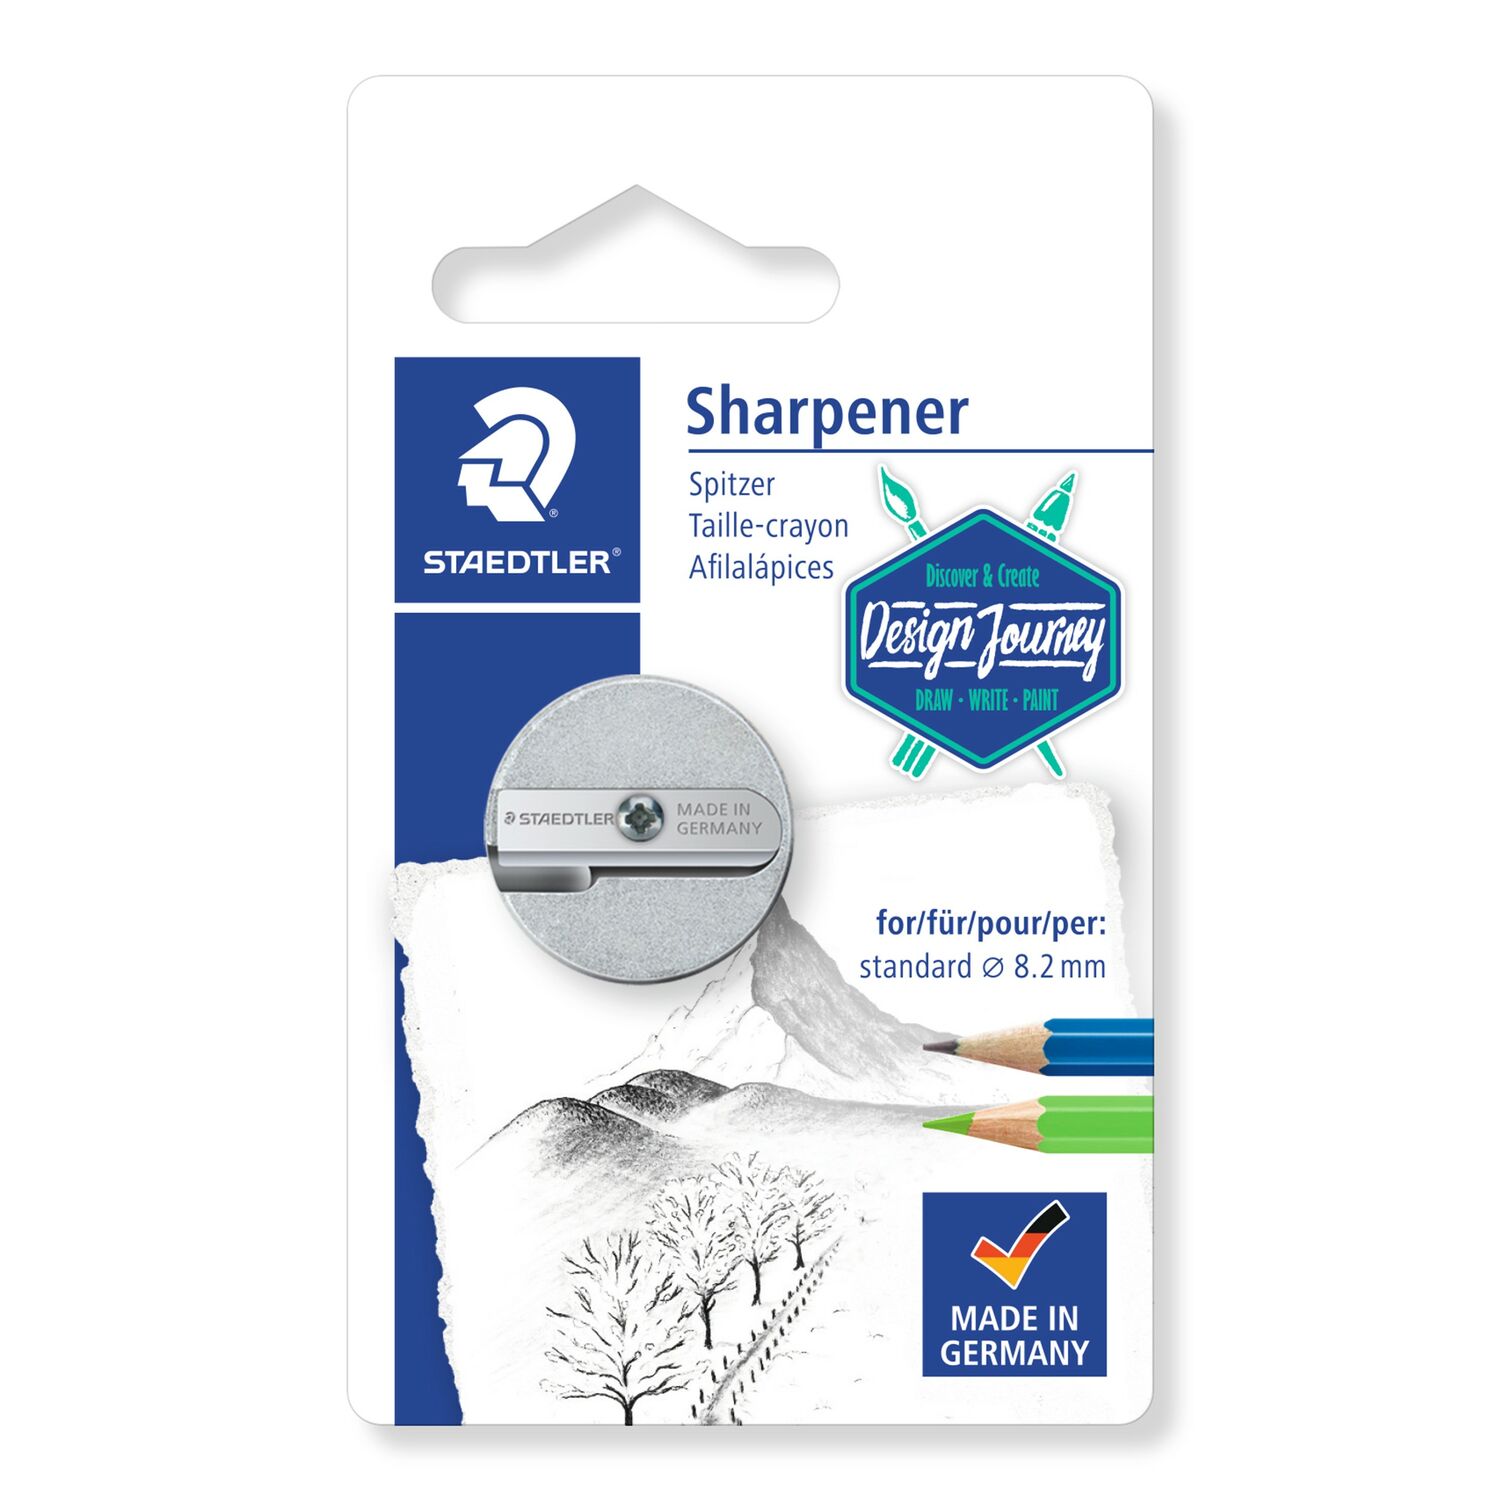 Blistercard containing 1 magnesium double-hole sharpener